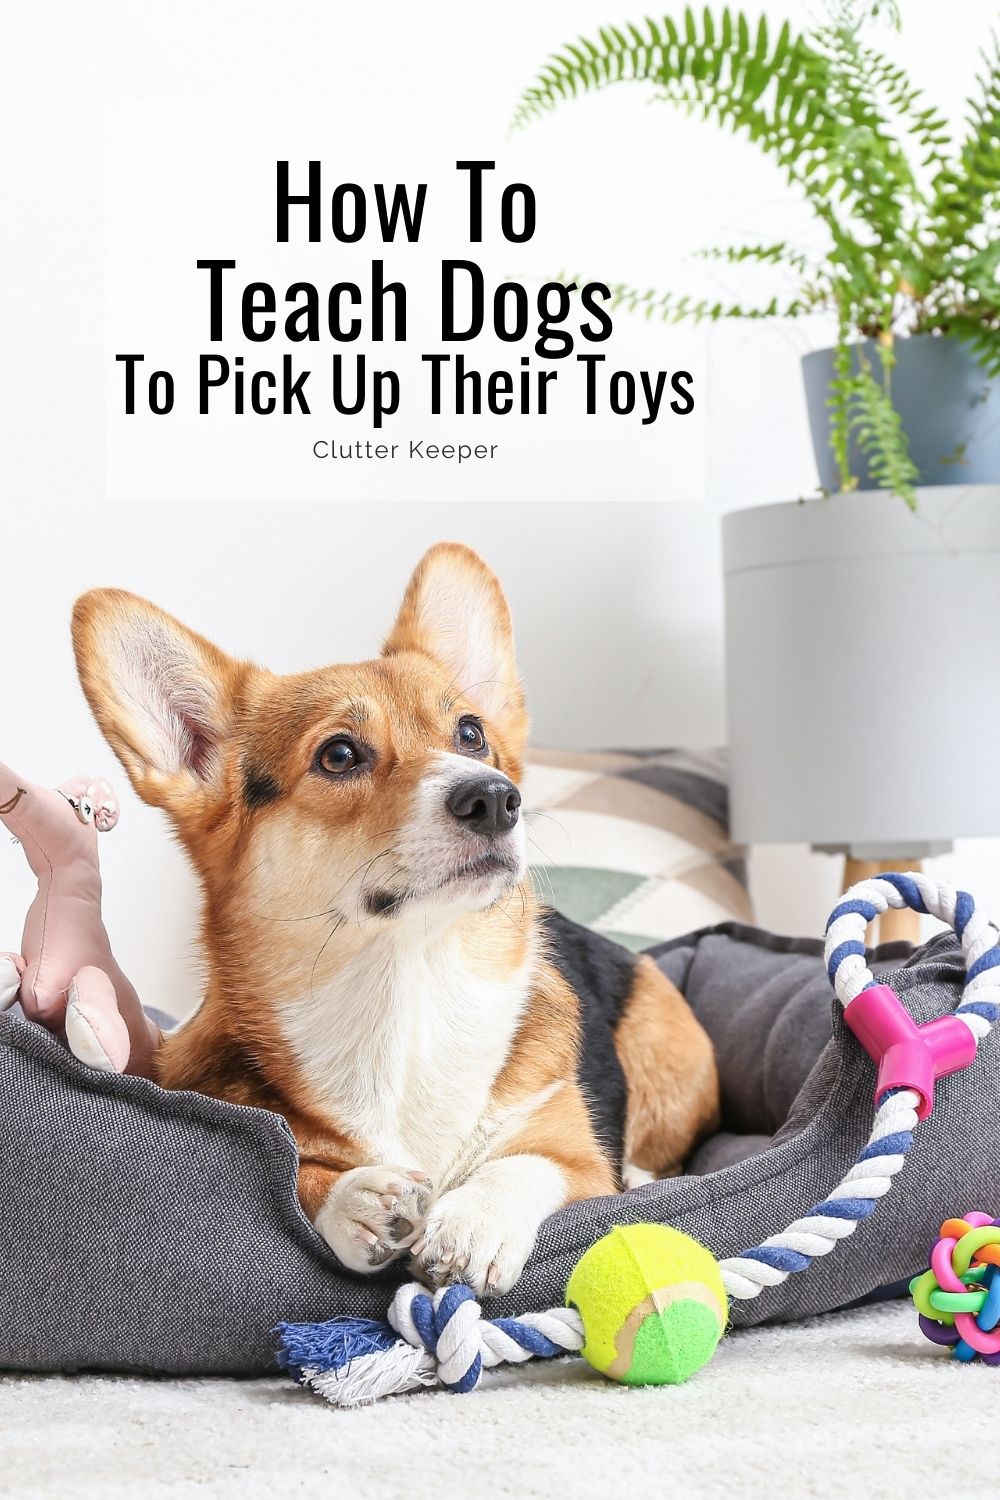 How to teach dogs to pick up their toys.